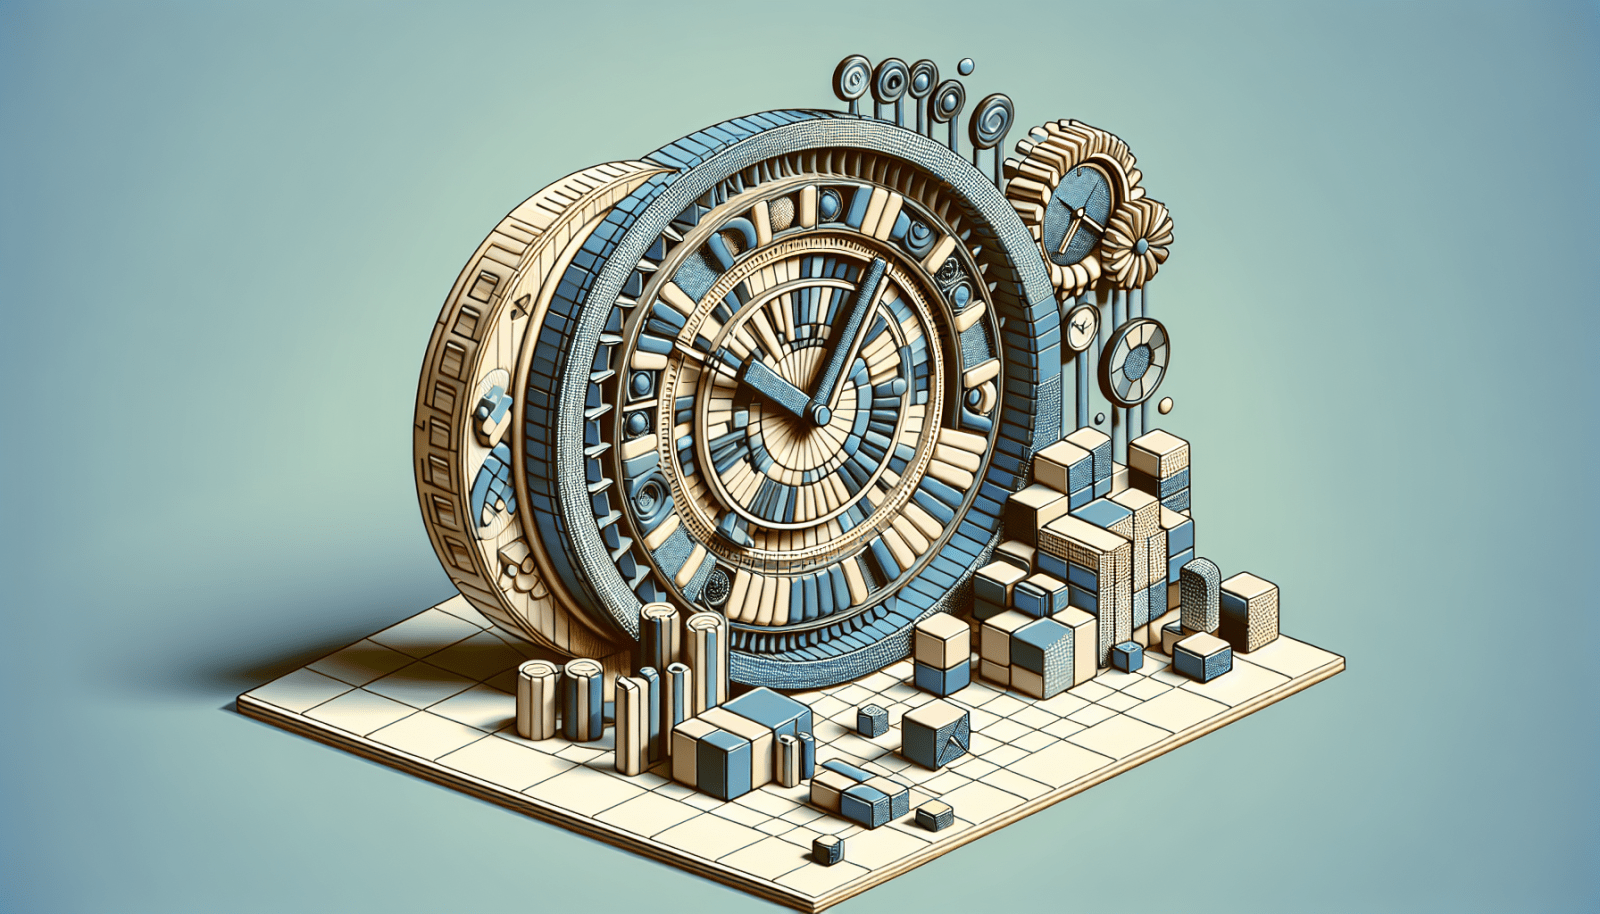 An isometric illustration featuring a stylized, mechanical structure resembling a clock with intricate gears and parts, surrounded by an arrangement of geometric shapes and smaller clock faces on a checkered floor, presented in a palette of blues, golds, and neutral tones.